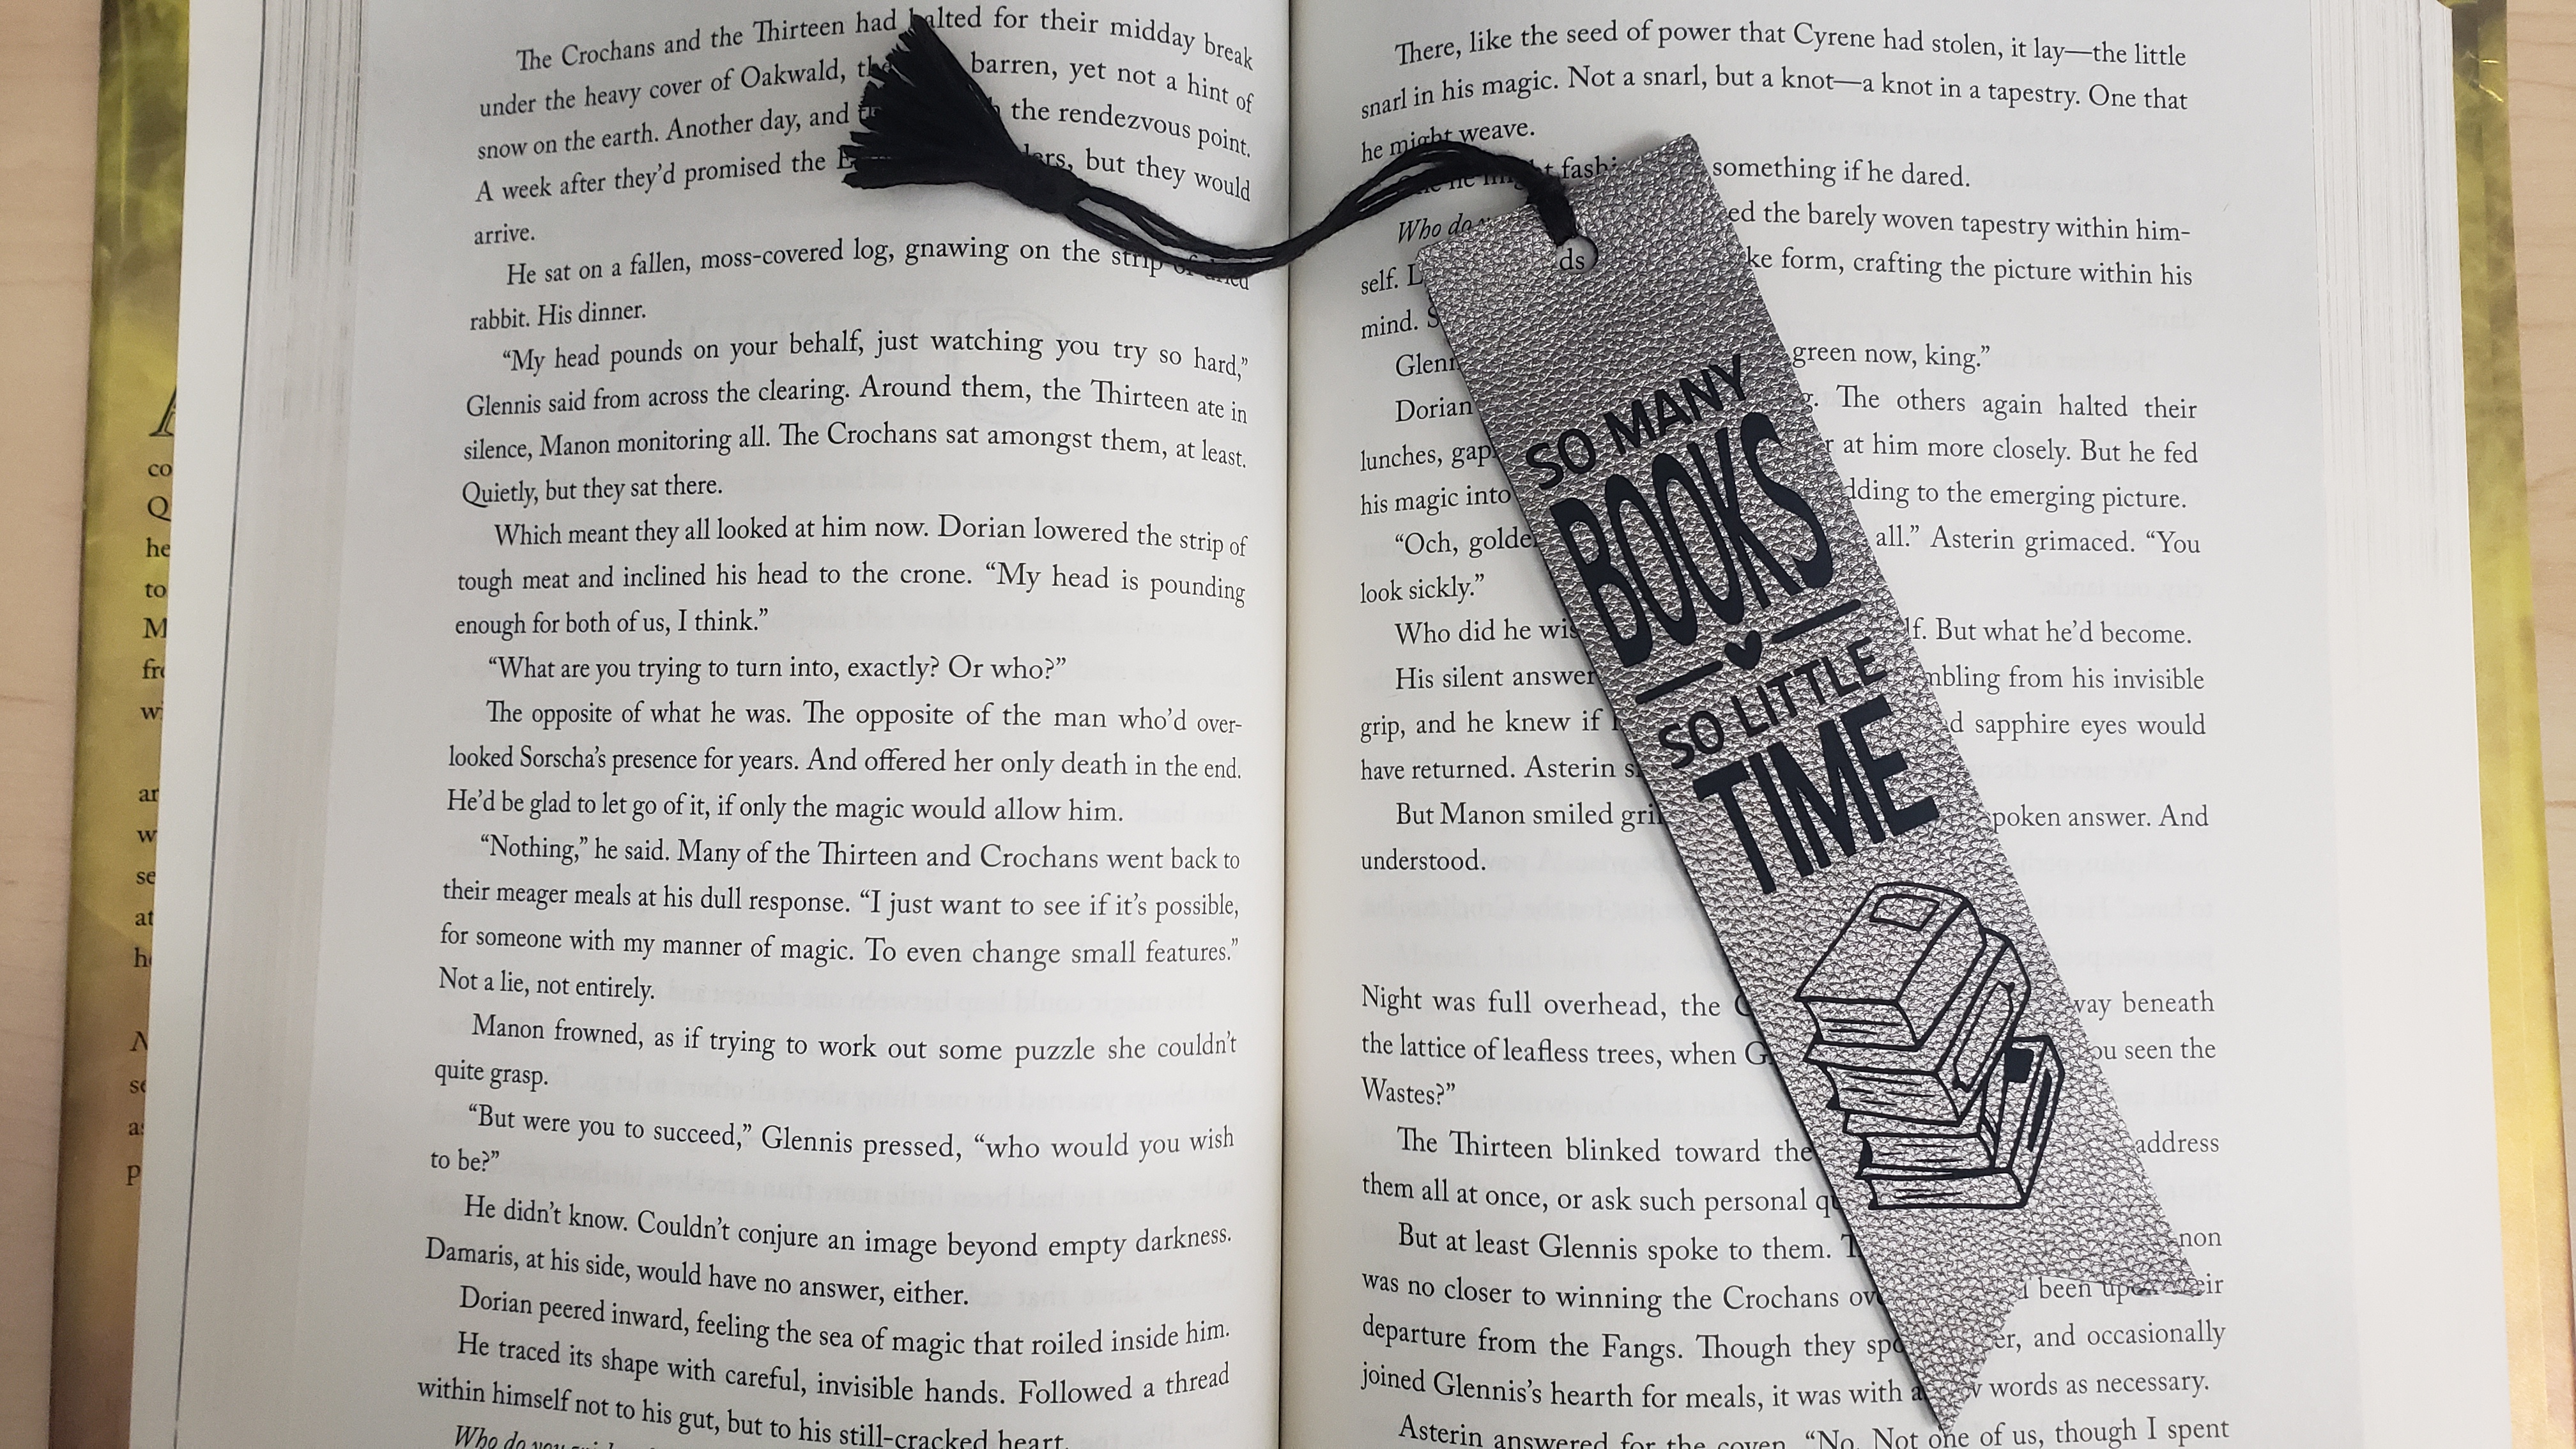 Bookmark with text "So Many Books So little Time"